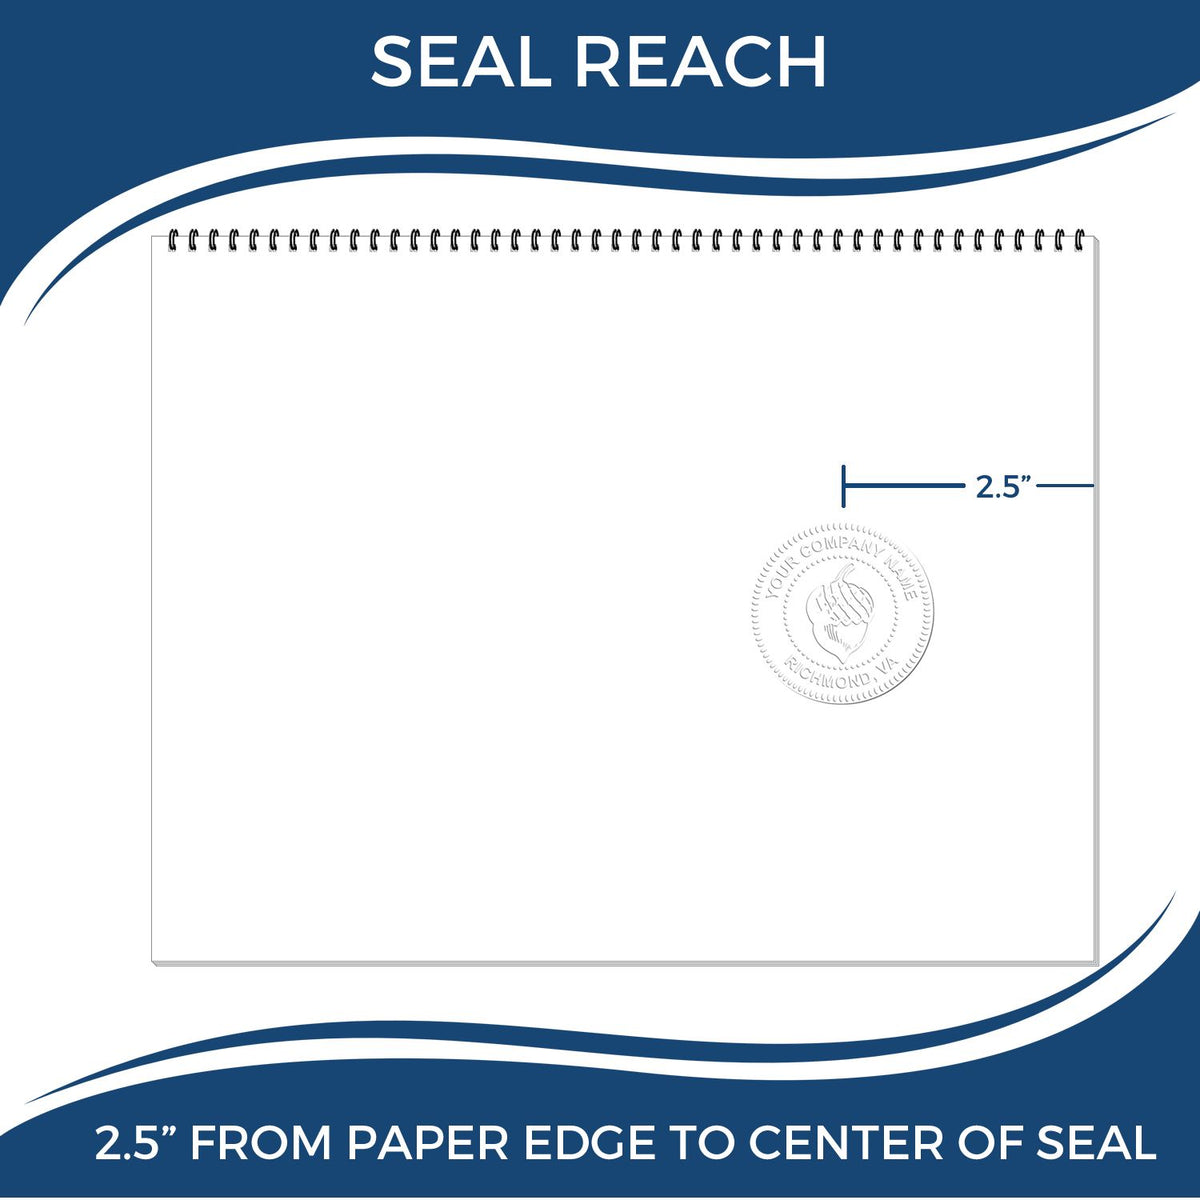 An infographic showing the seal reach which is represented by a ruler and a miniature seal image of the Long Reach Pennsylvania Geology Seal